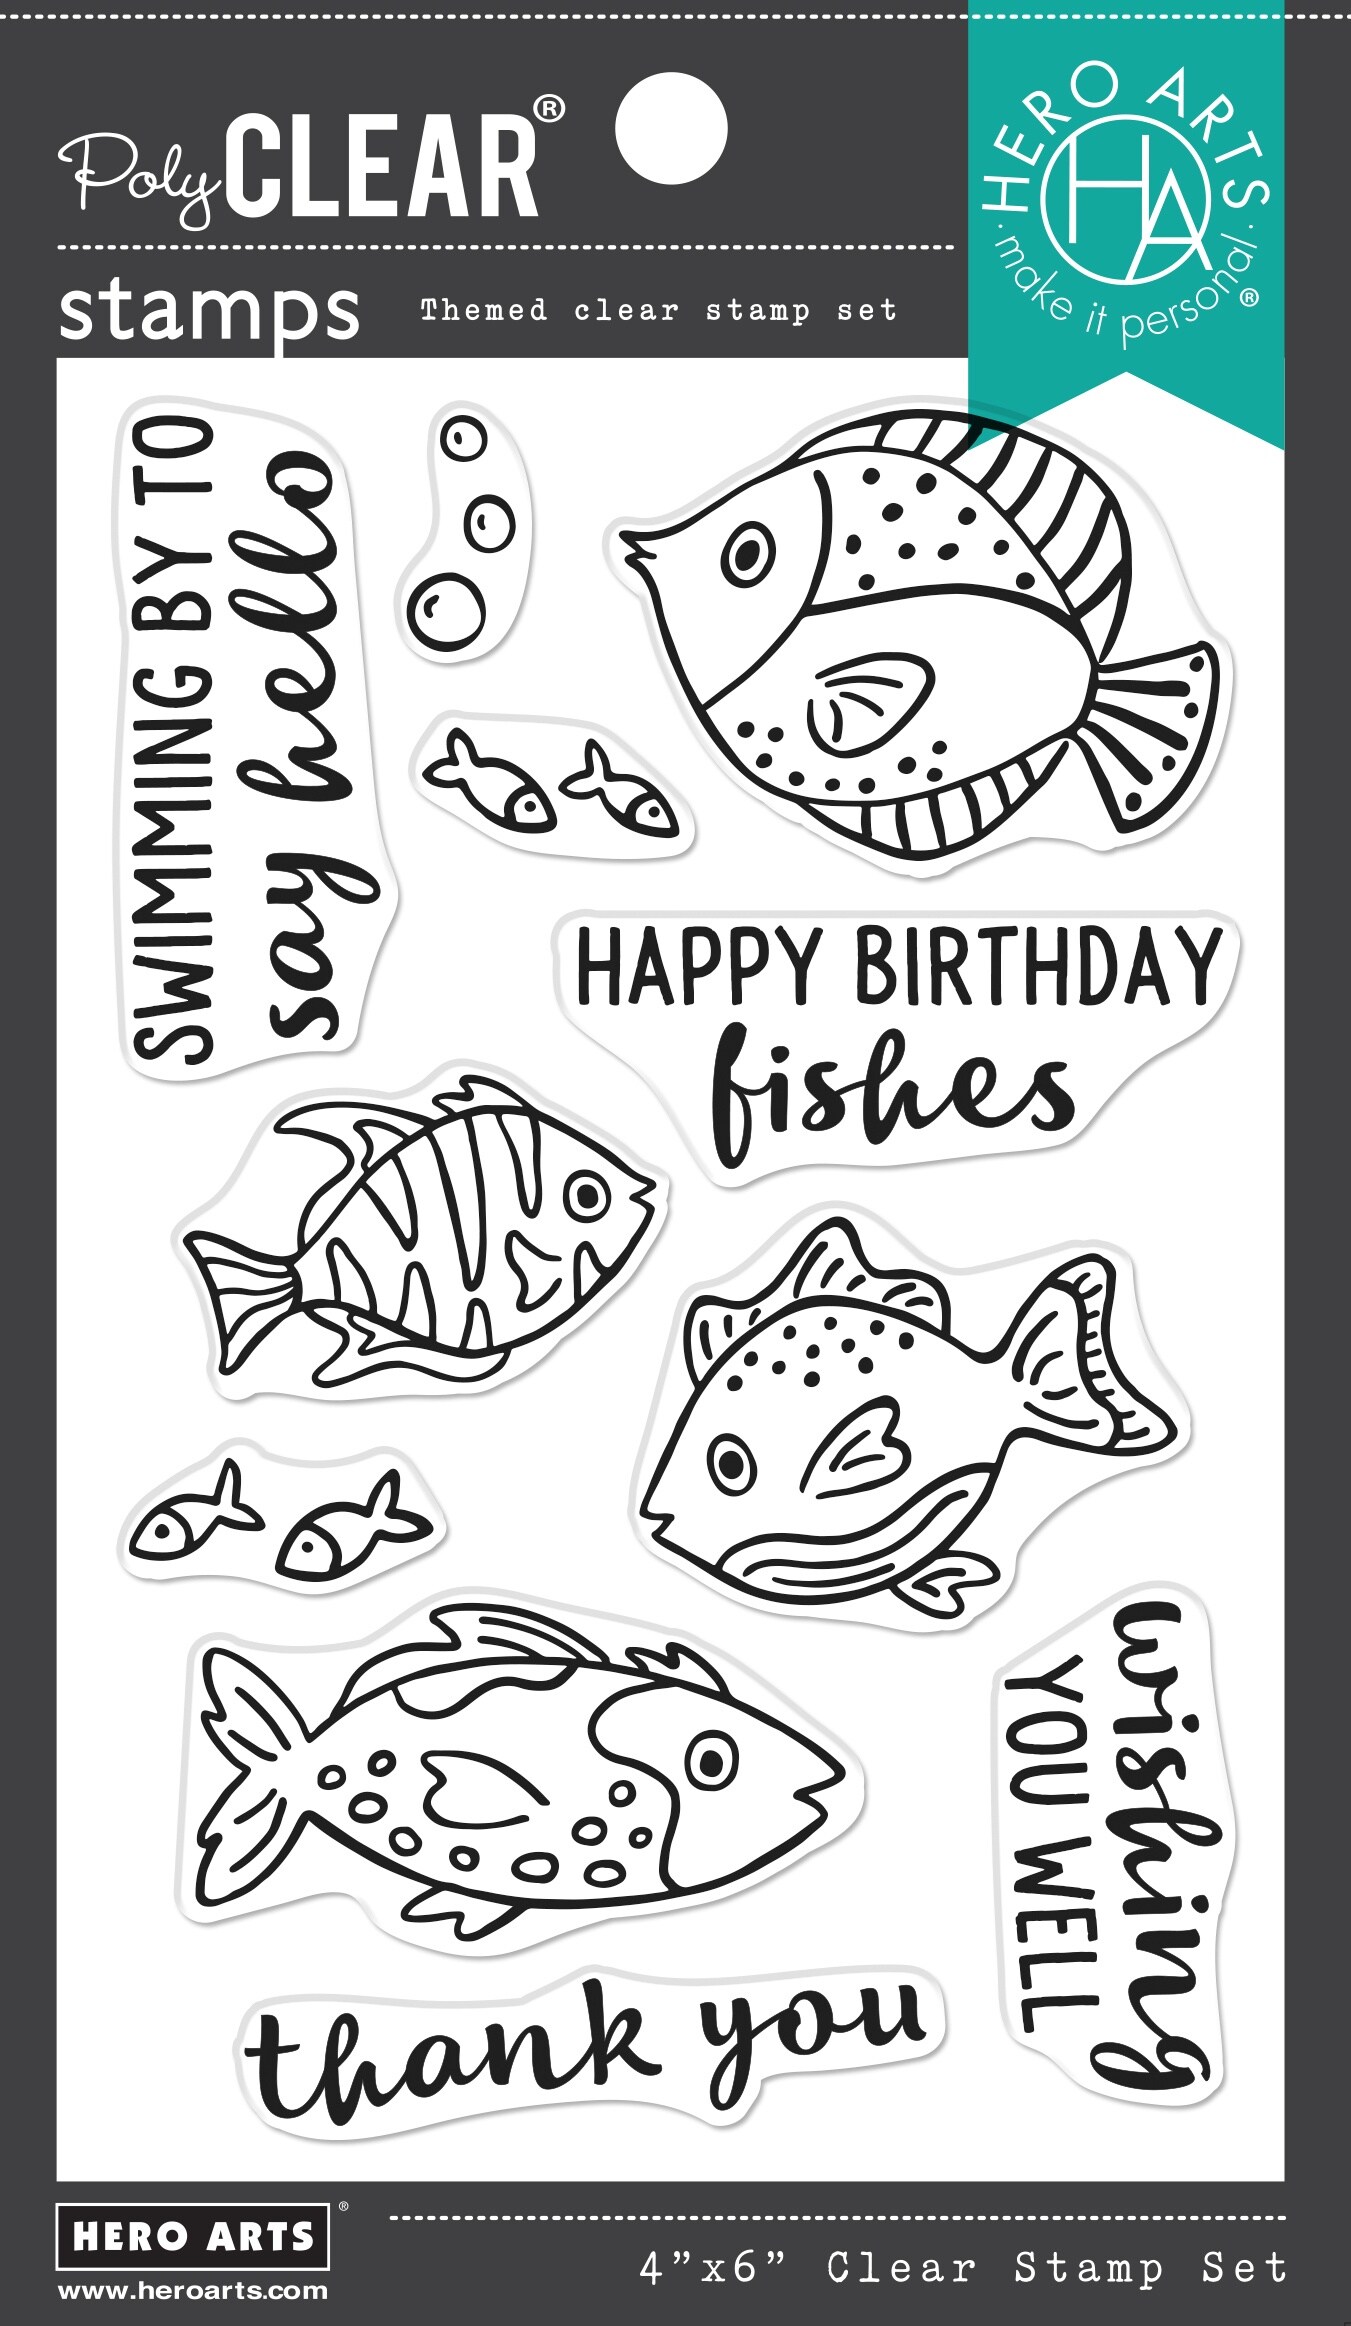 Hero Arts Clear Stamp Set-Hello Fishes